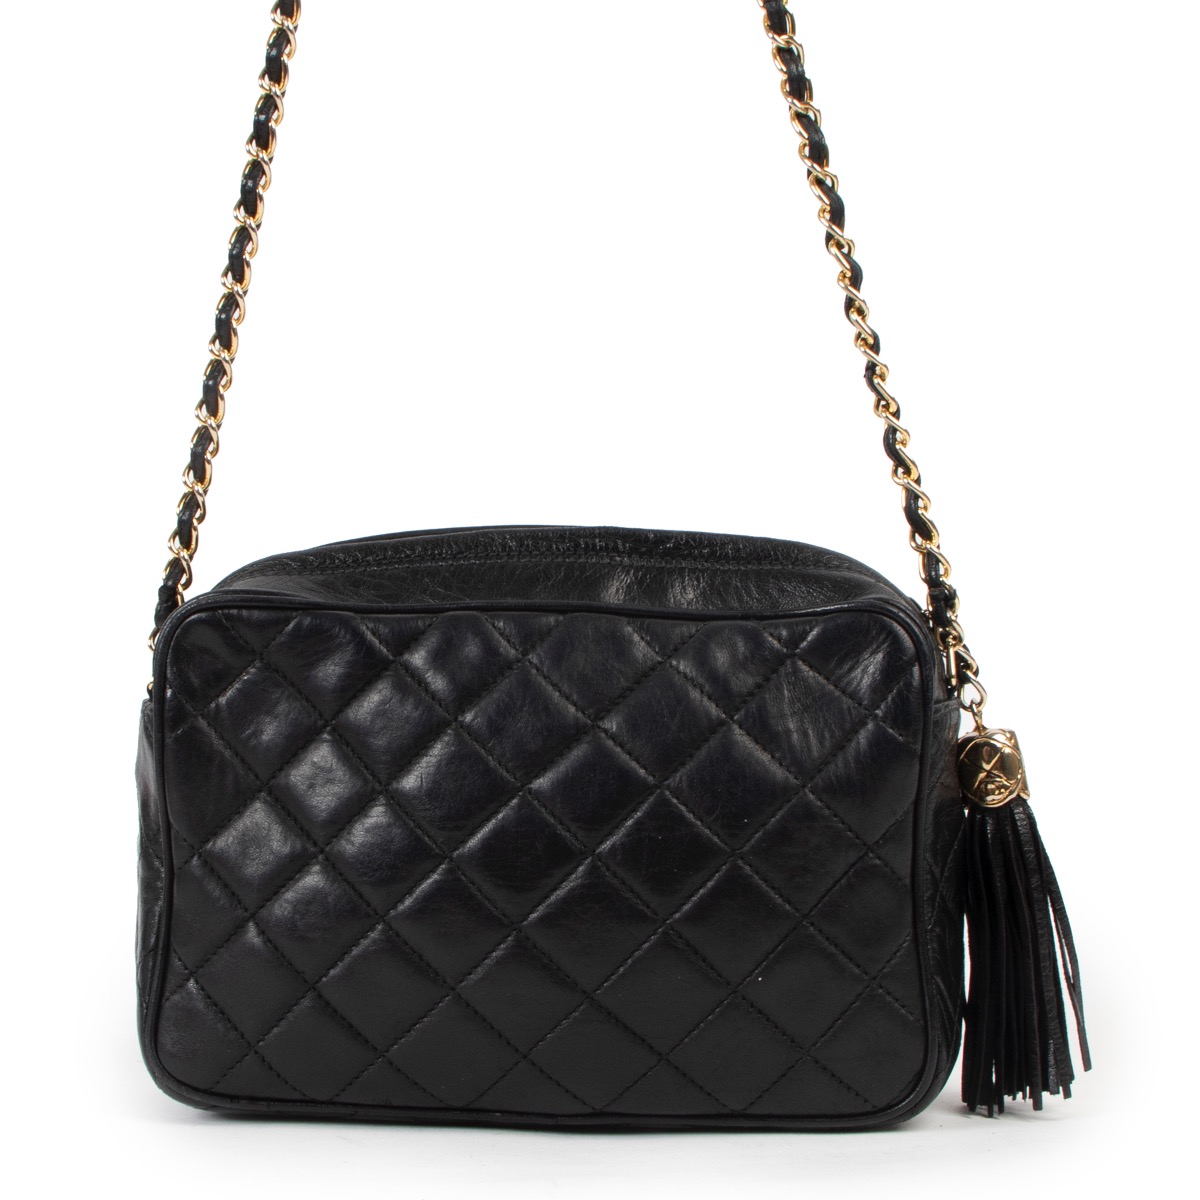 Chanel Black Quilted Leather Vintage Camera Crossbody Bag